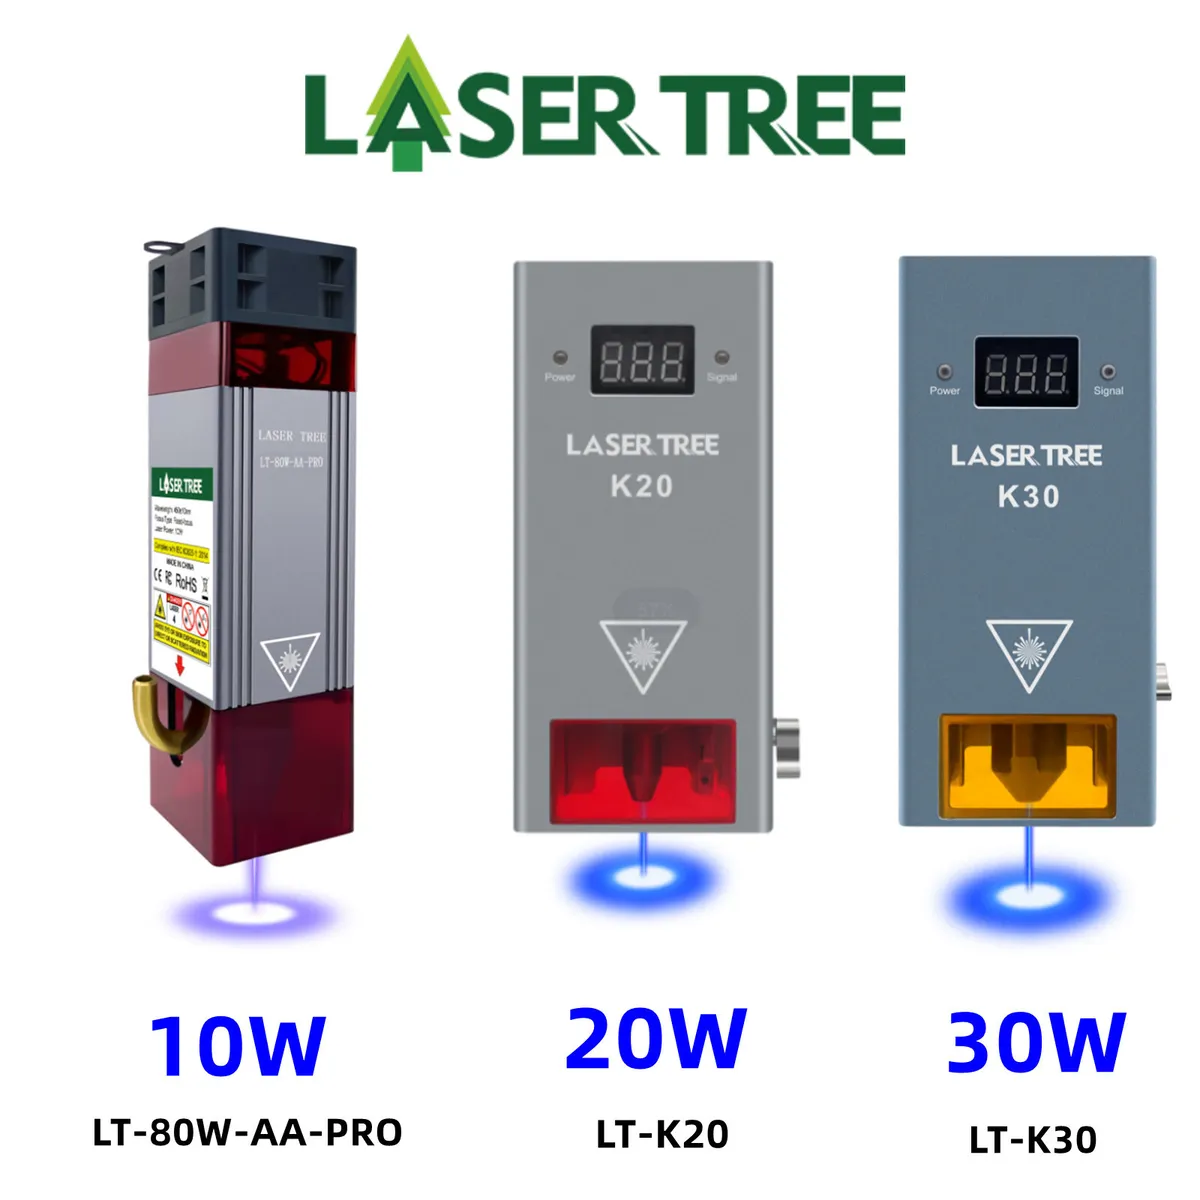 5.5W 10W 20W 30W 40W Laser Module 450nm Engraving Laser Head Fixed Focal  Length High Precision Engraving for CNC Laser Engraver